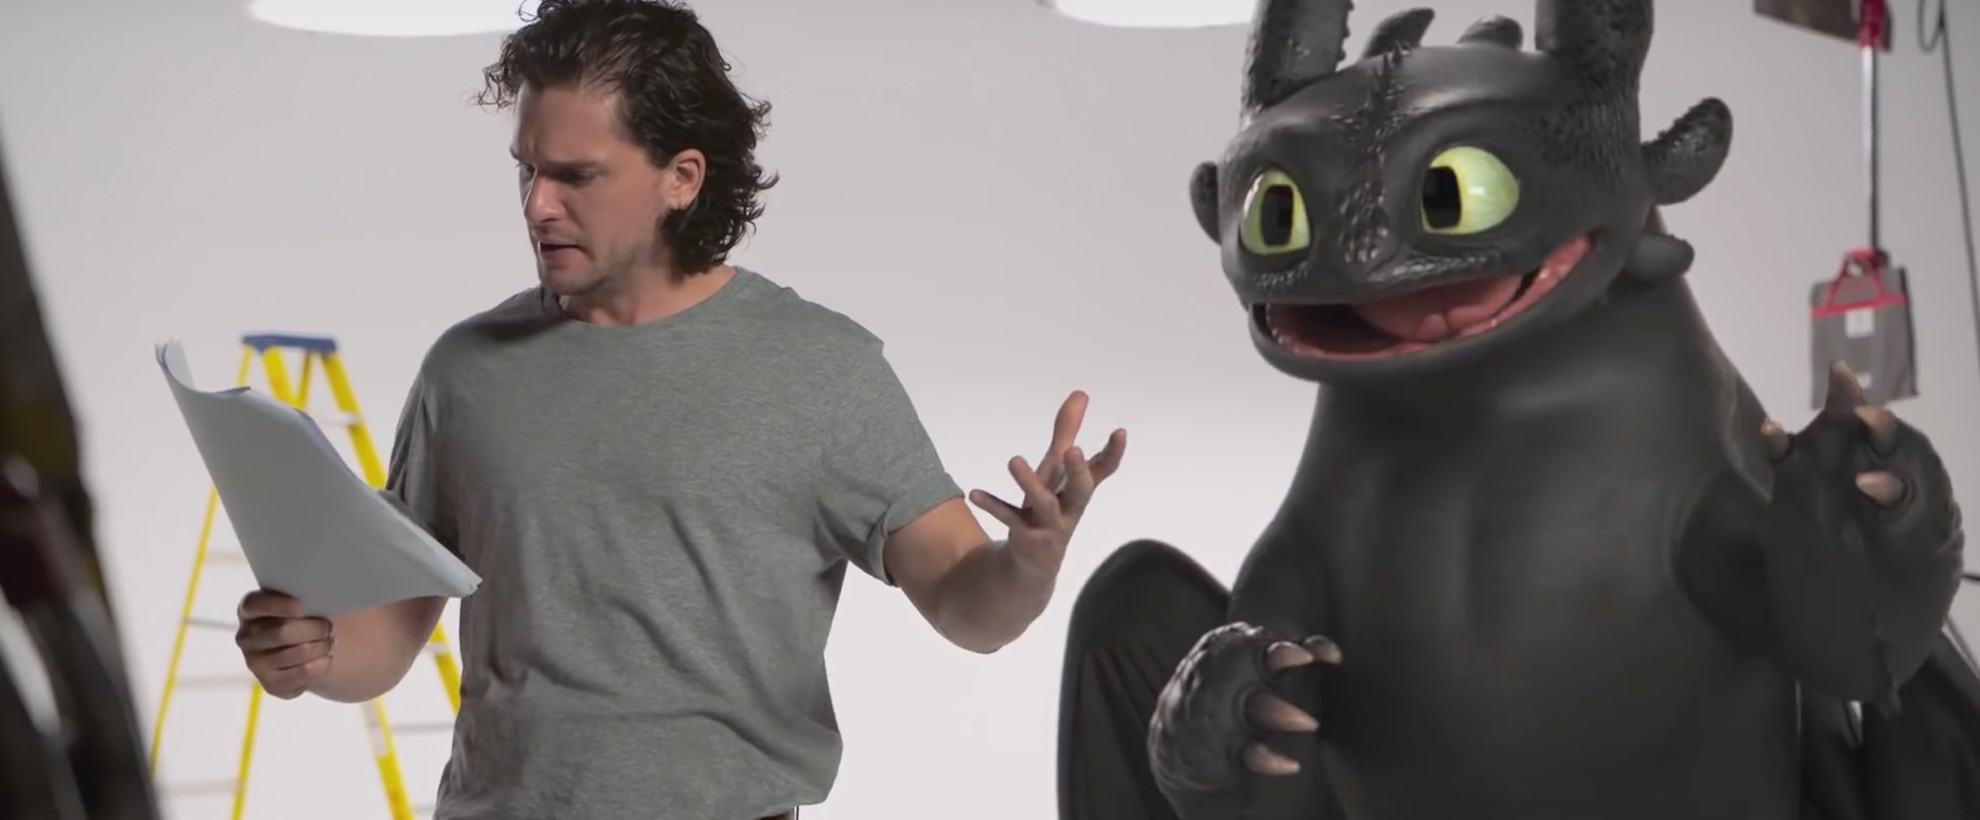 Kit Harrington and toothless from How to Train Your Dragon